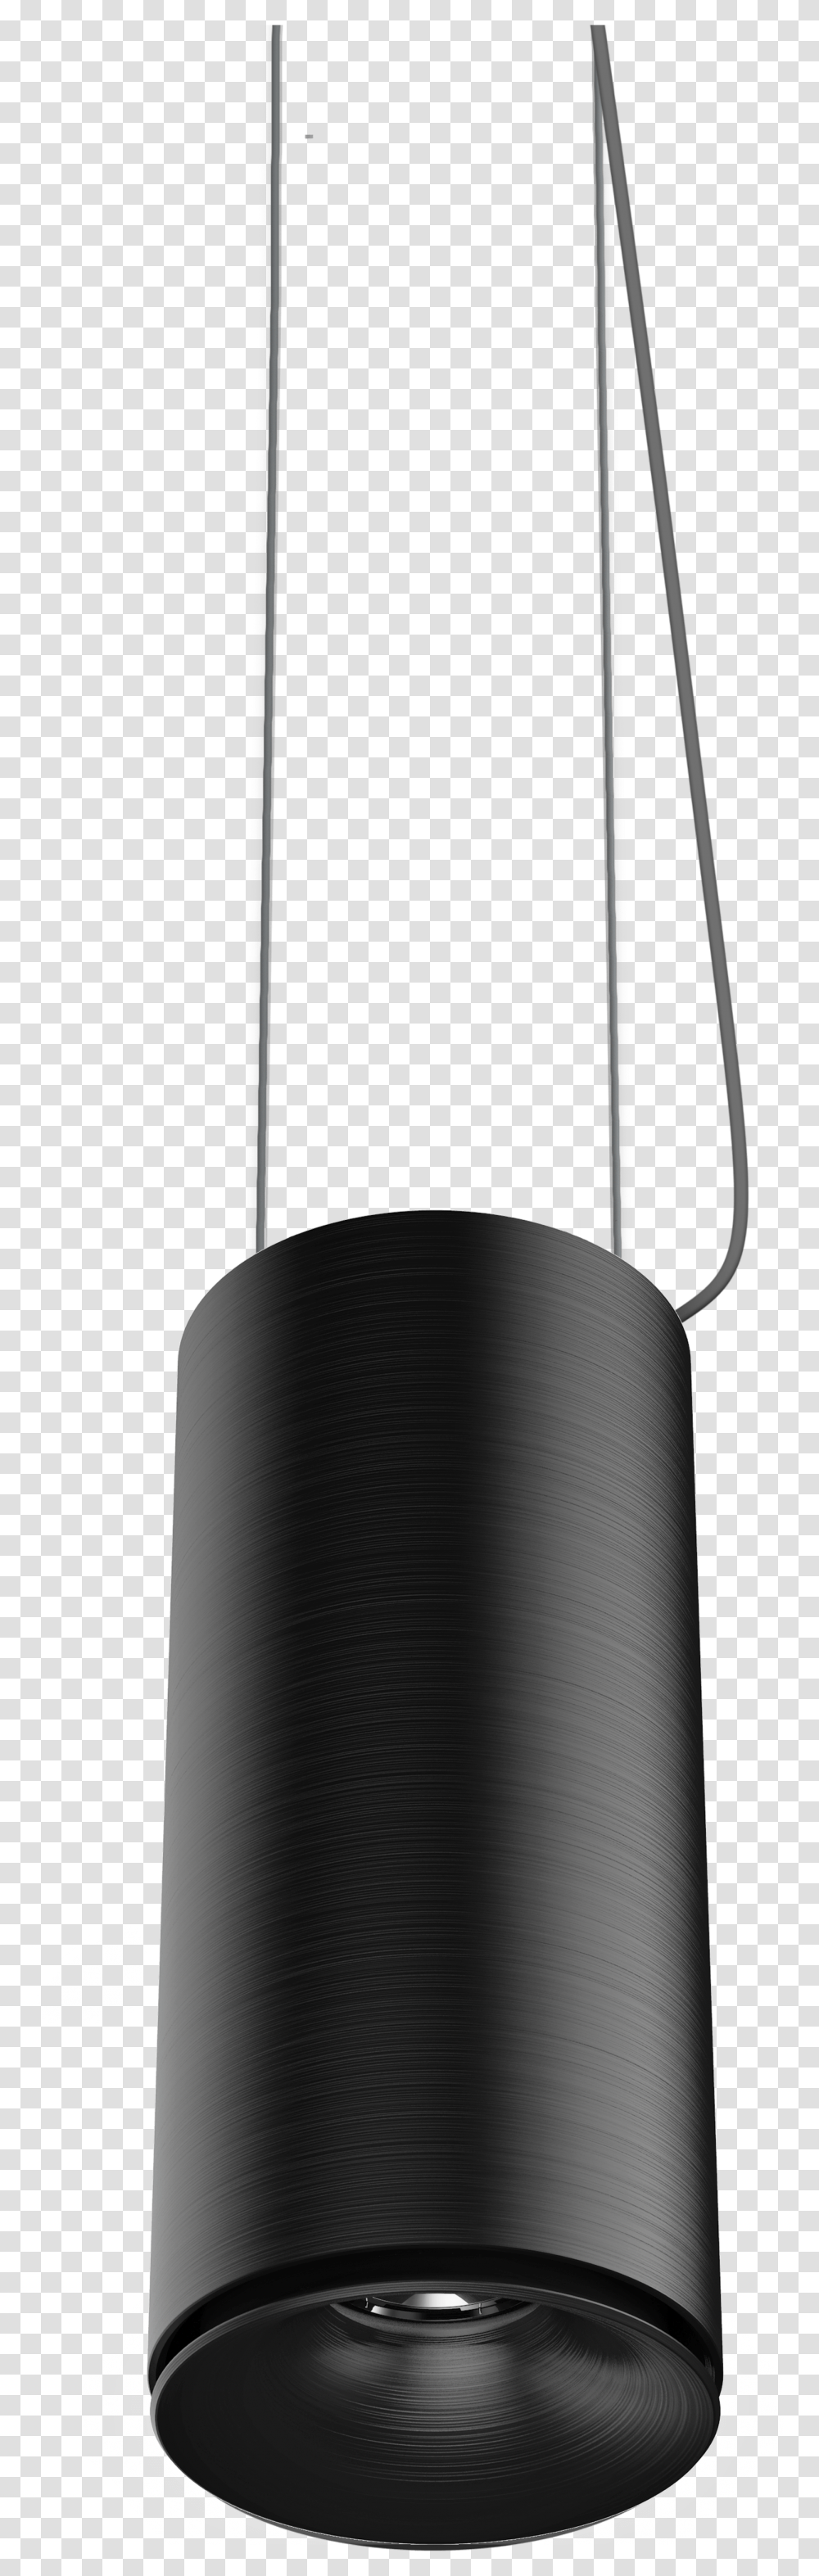 Silo Rope, Cylinder, Lock, Microphone, Electrical Device Transparent Png